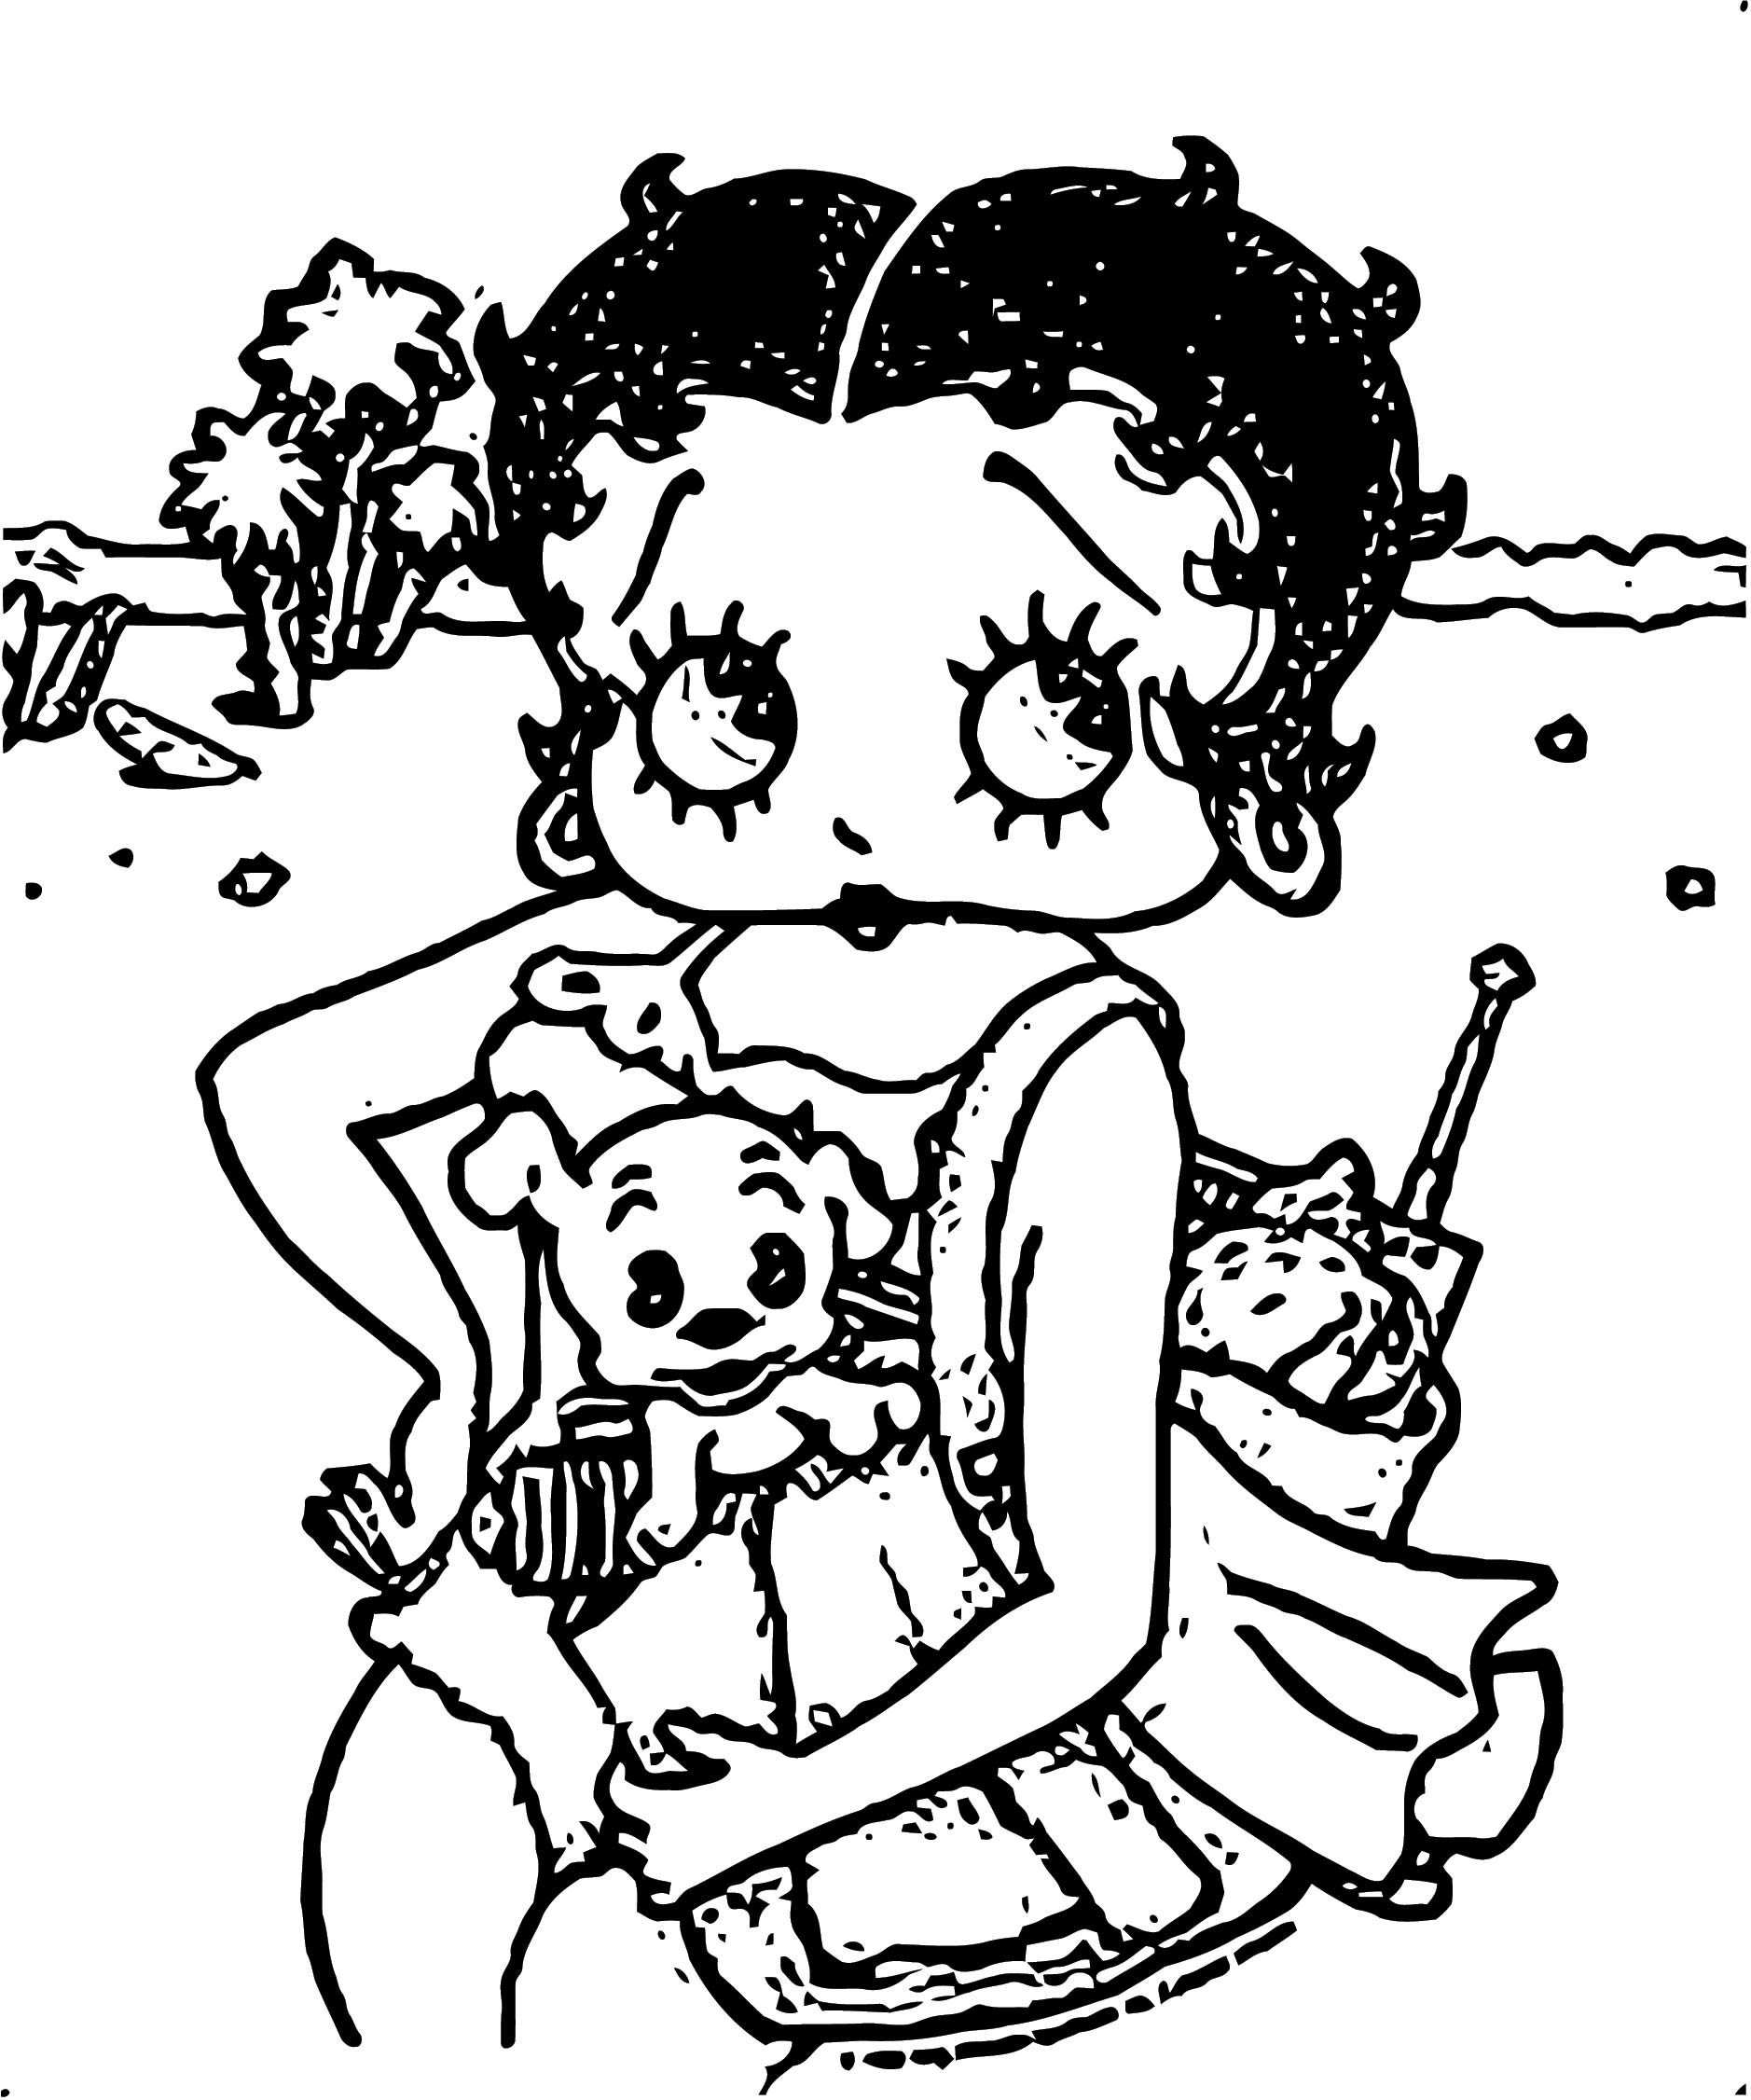 betty boop motorcycle coloring page